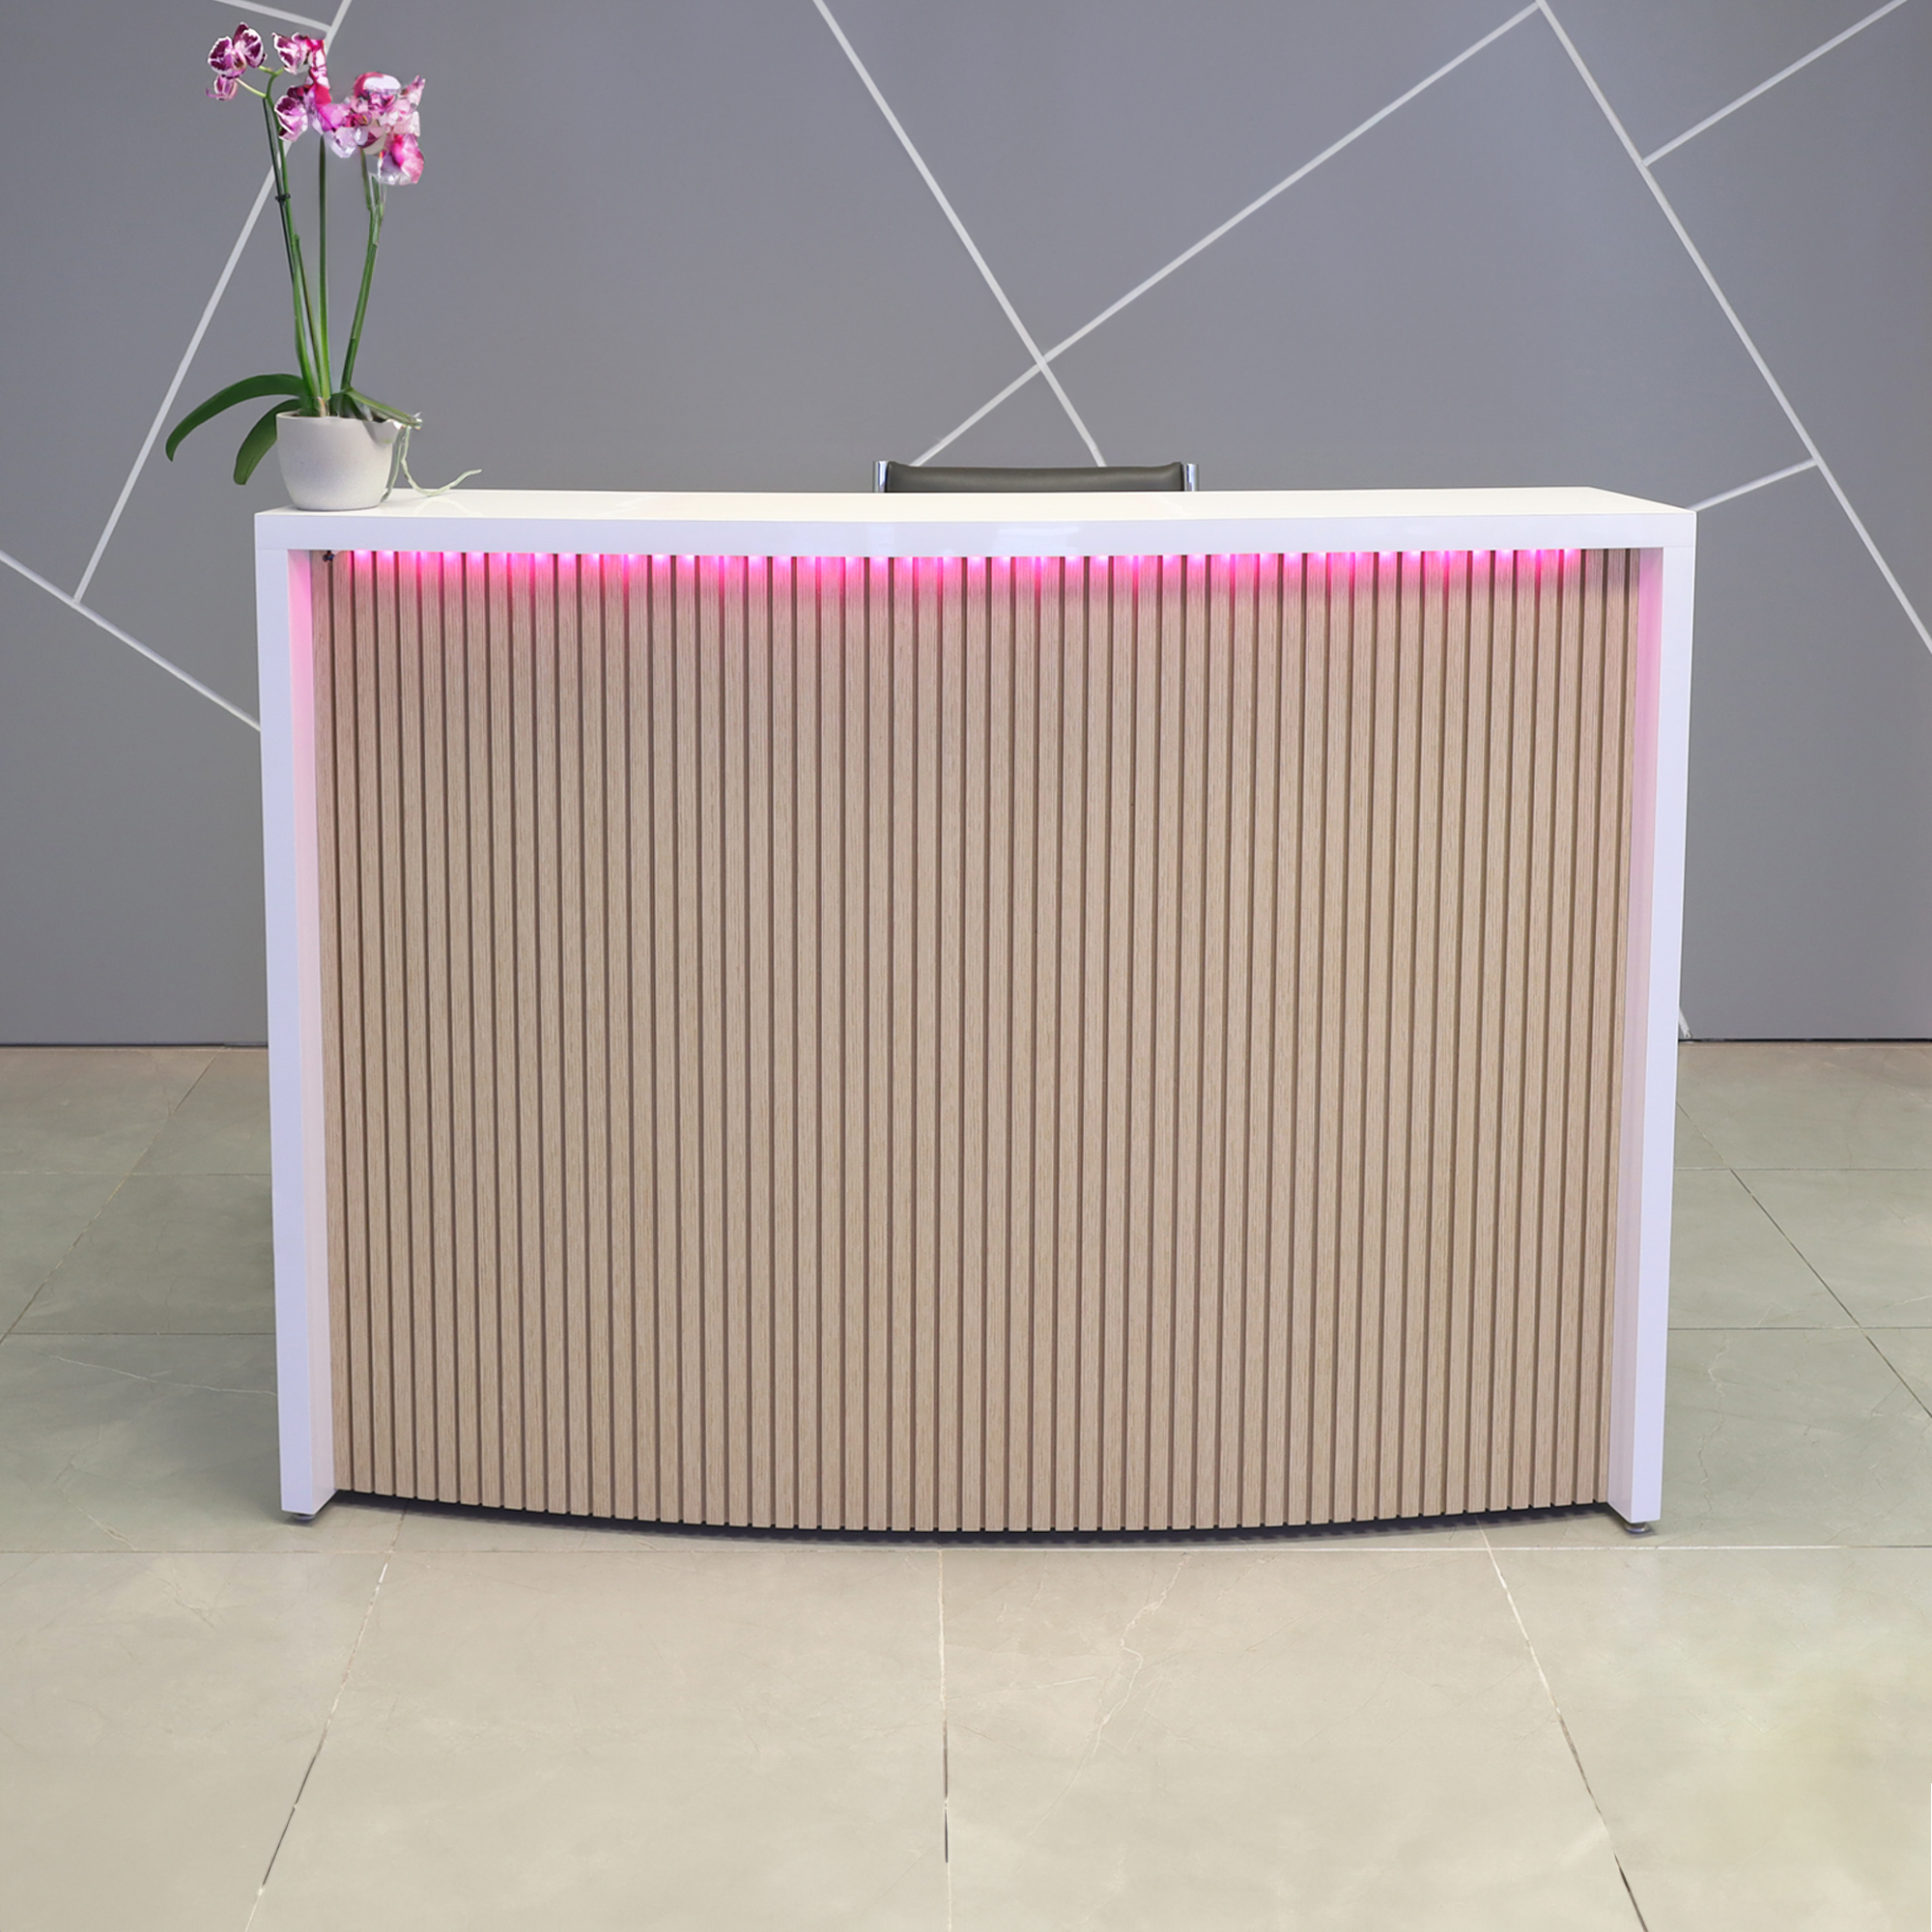 72-inch Seattle X1 Custom Reception Desk in white gloss laminate desk and maple tambour on curved front panel, with multi-colored LED, shown here.